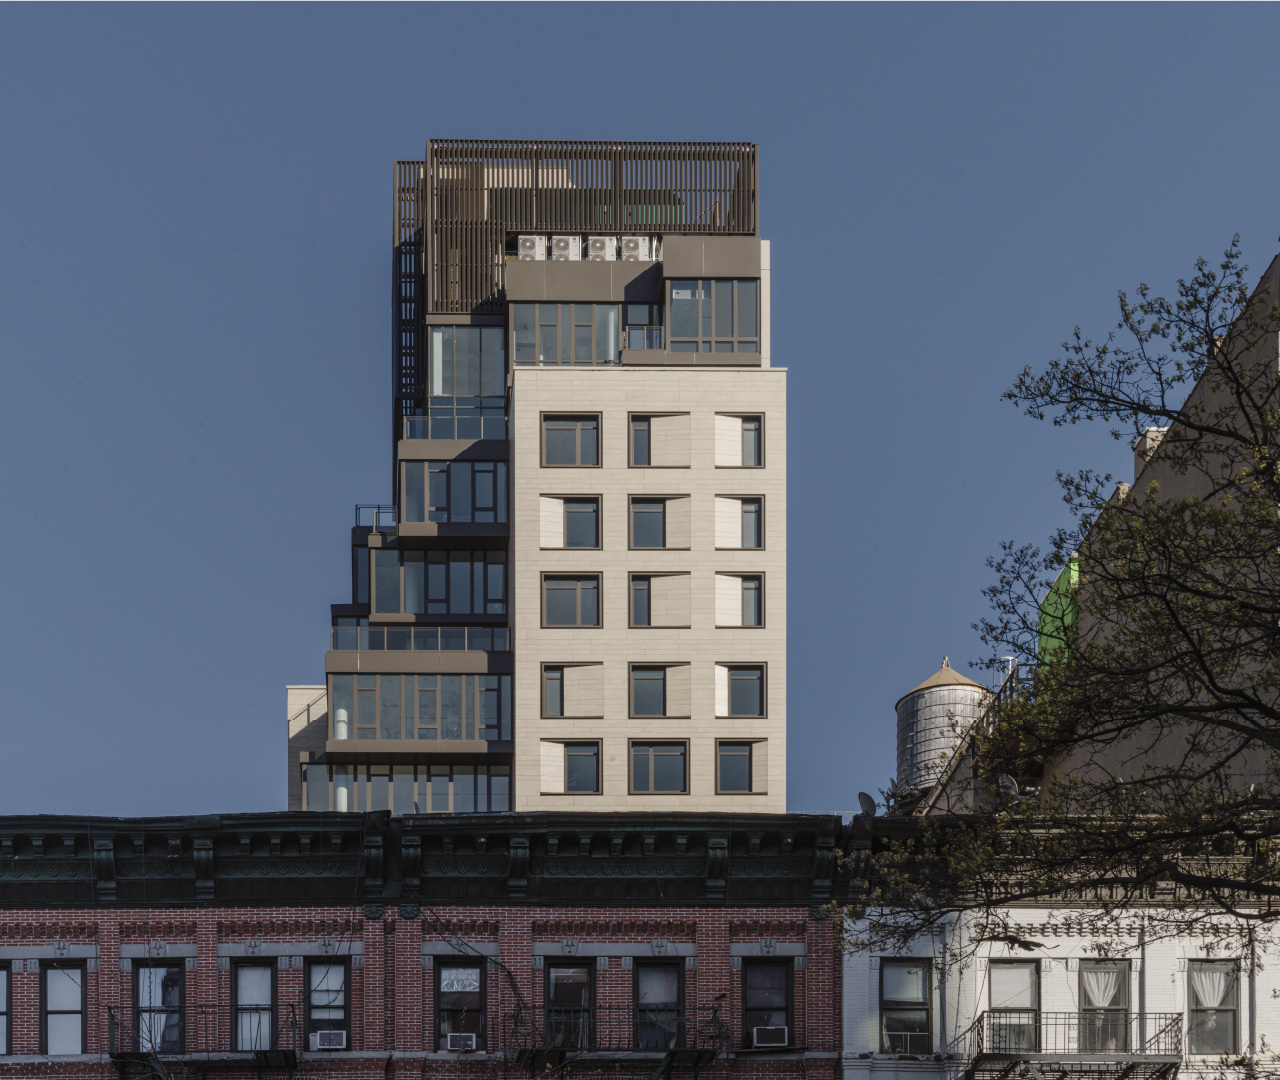 212 West 95 Street Large format porcelain cladding facade tower in contrast with its context